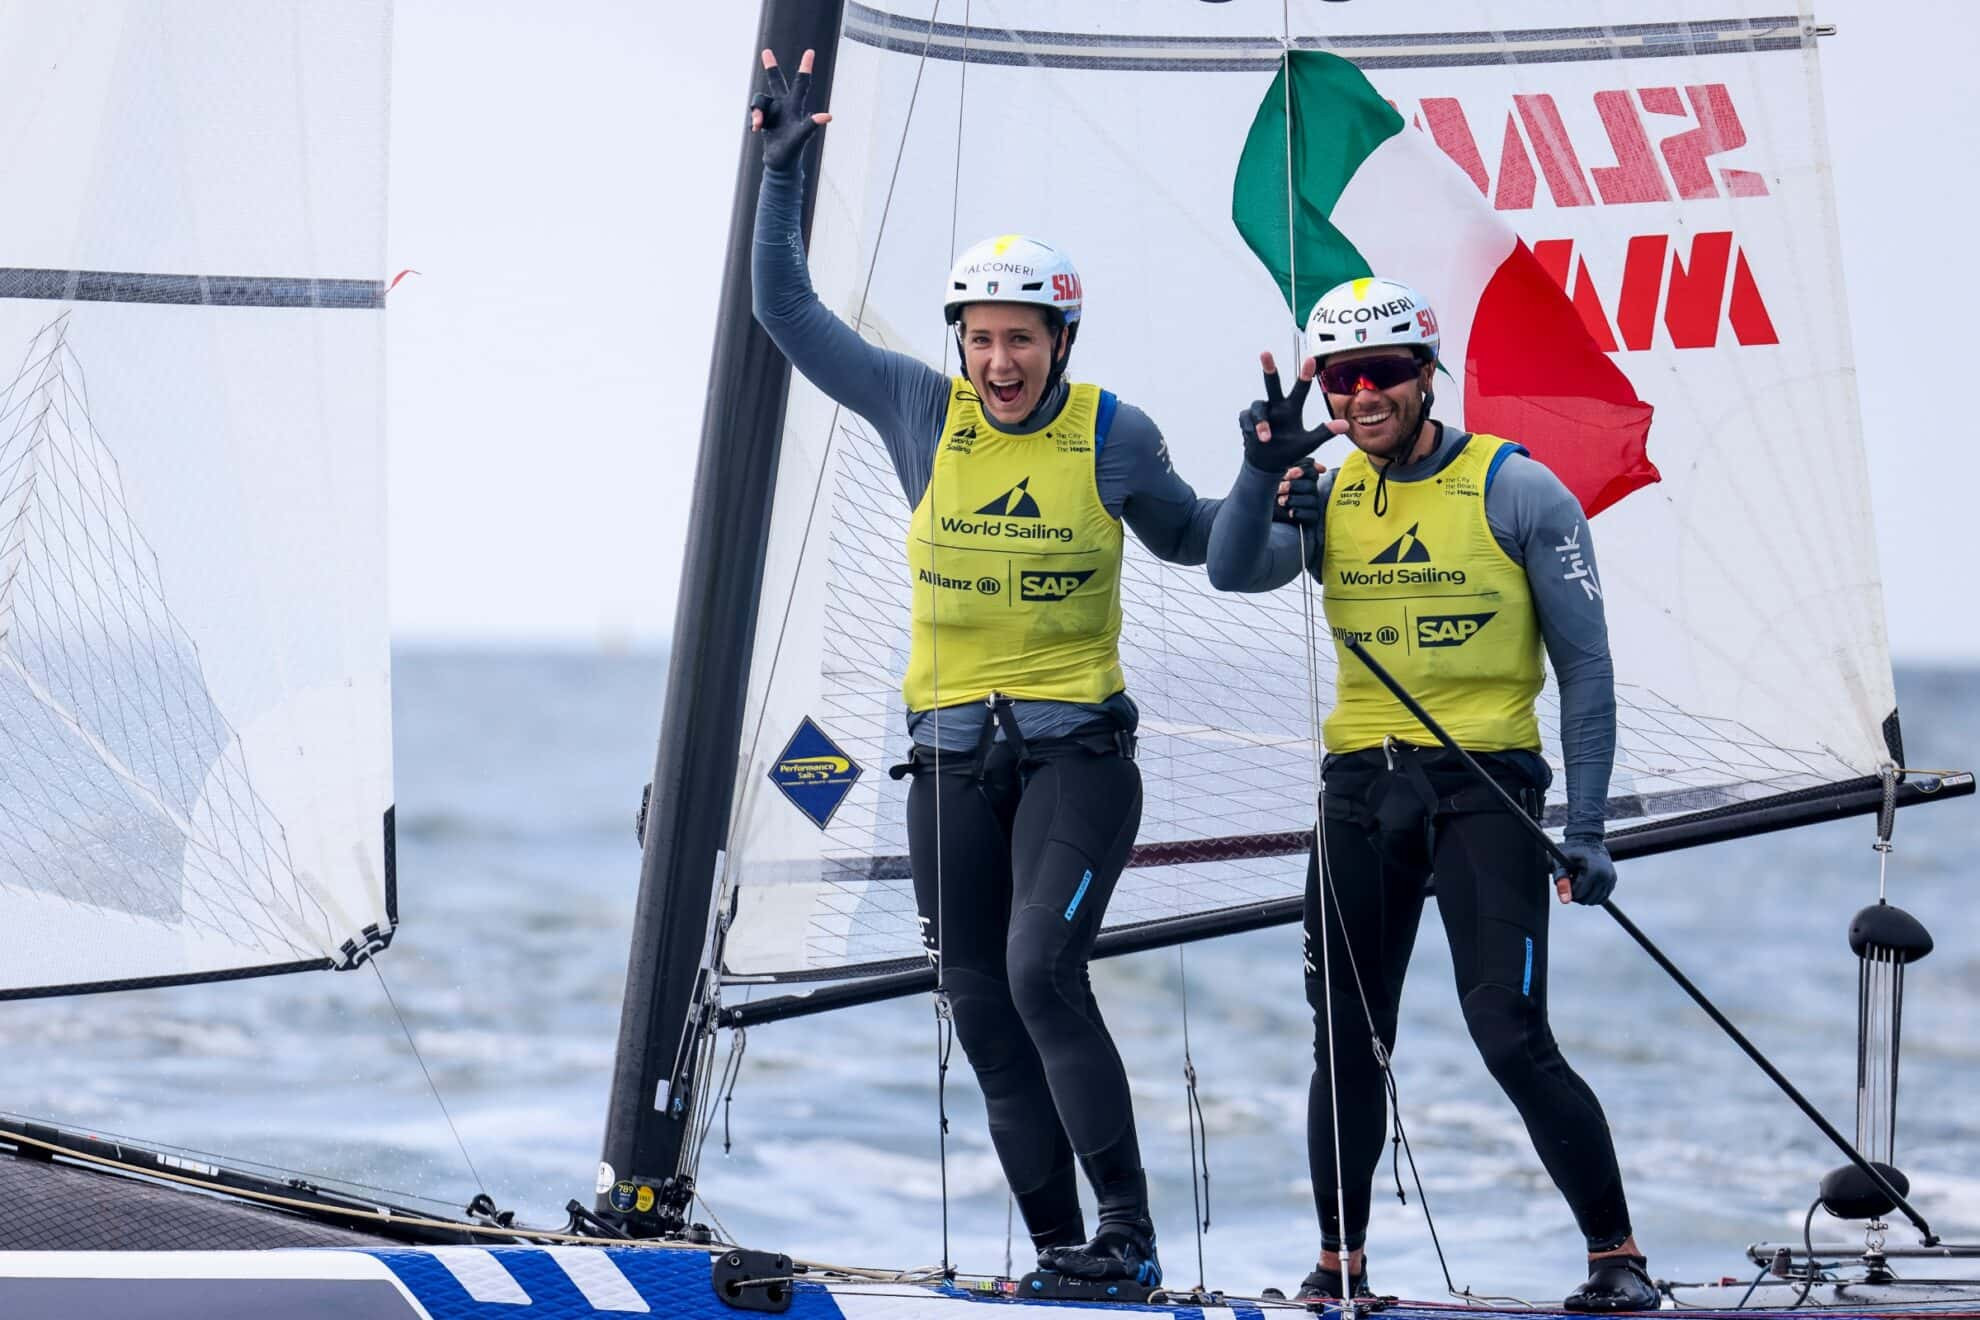 Tita and Banti finish remarkable Sailing World Championships form with gold